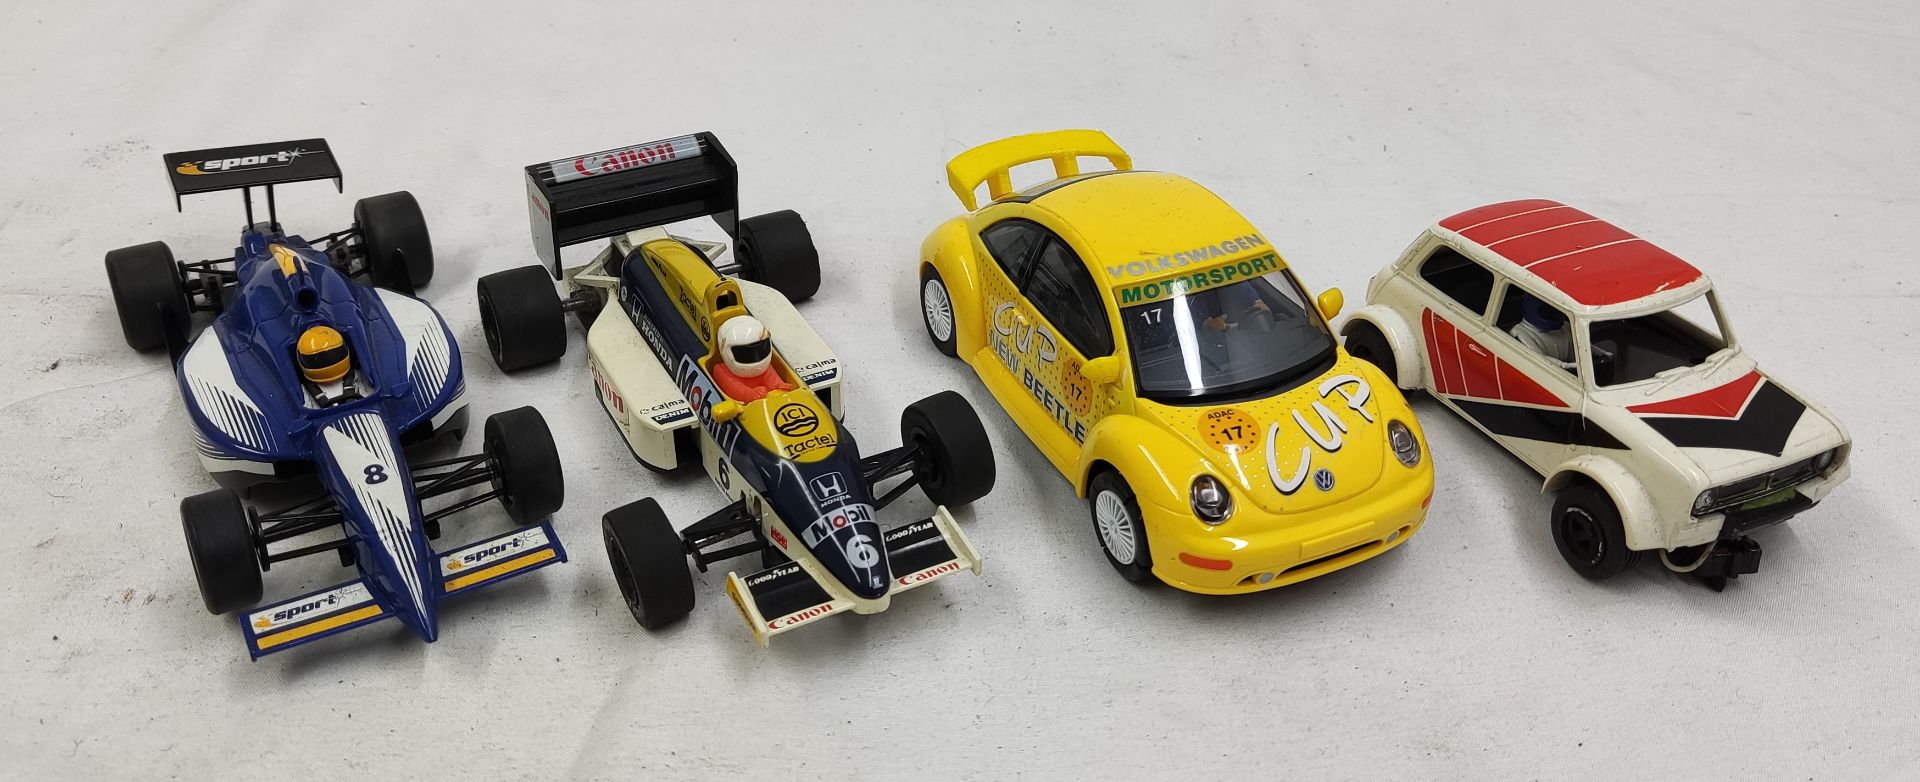 4 x Scalextric Cars Including VW Beetle, F1 Car, Open Wheeler and Mini Clubman 1275GT - Tested and